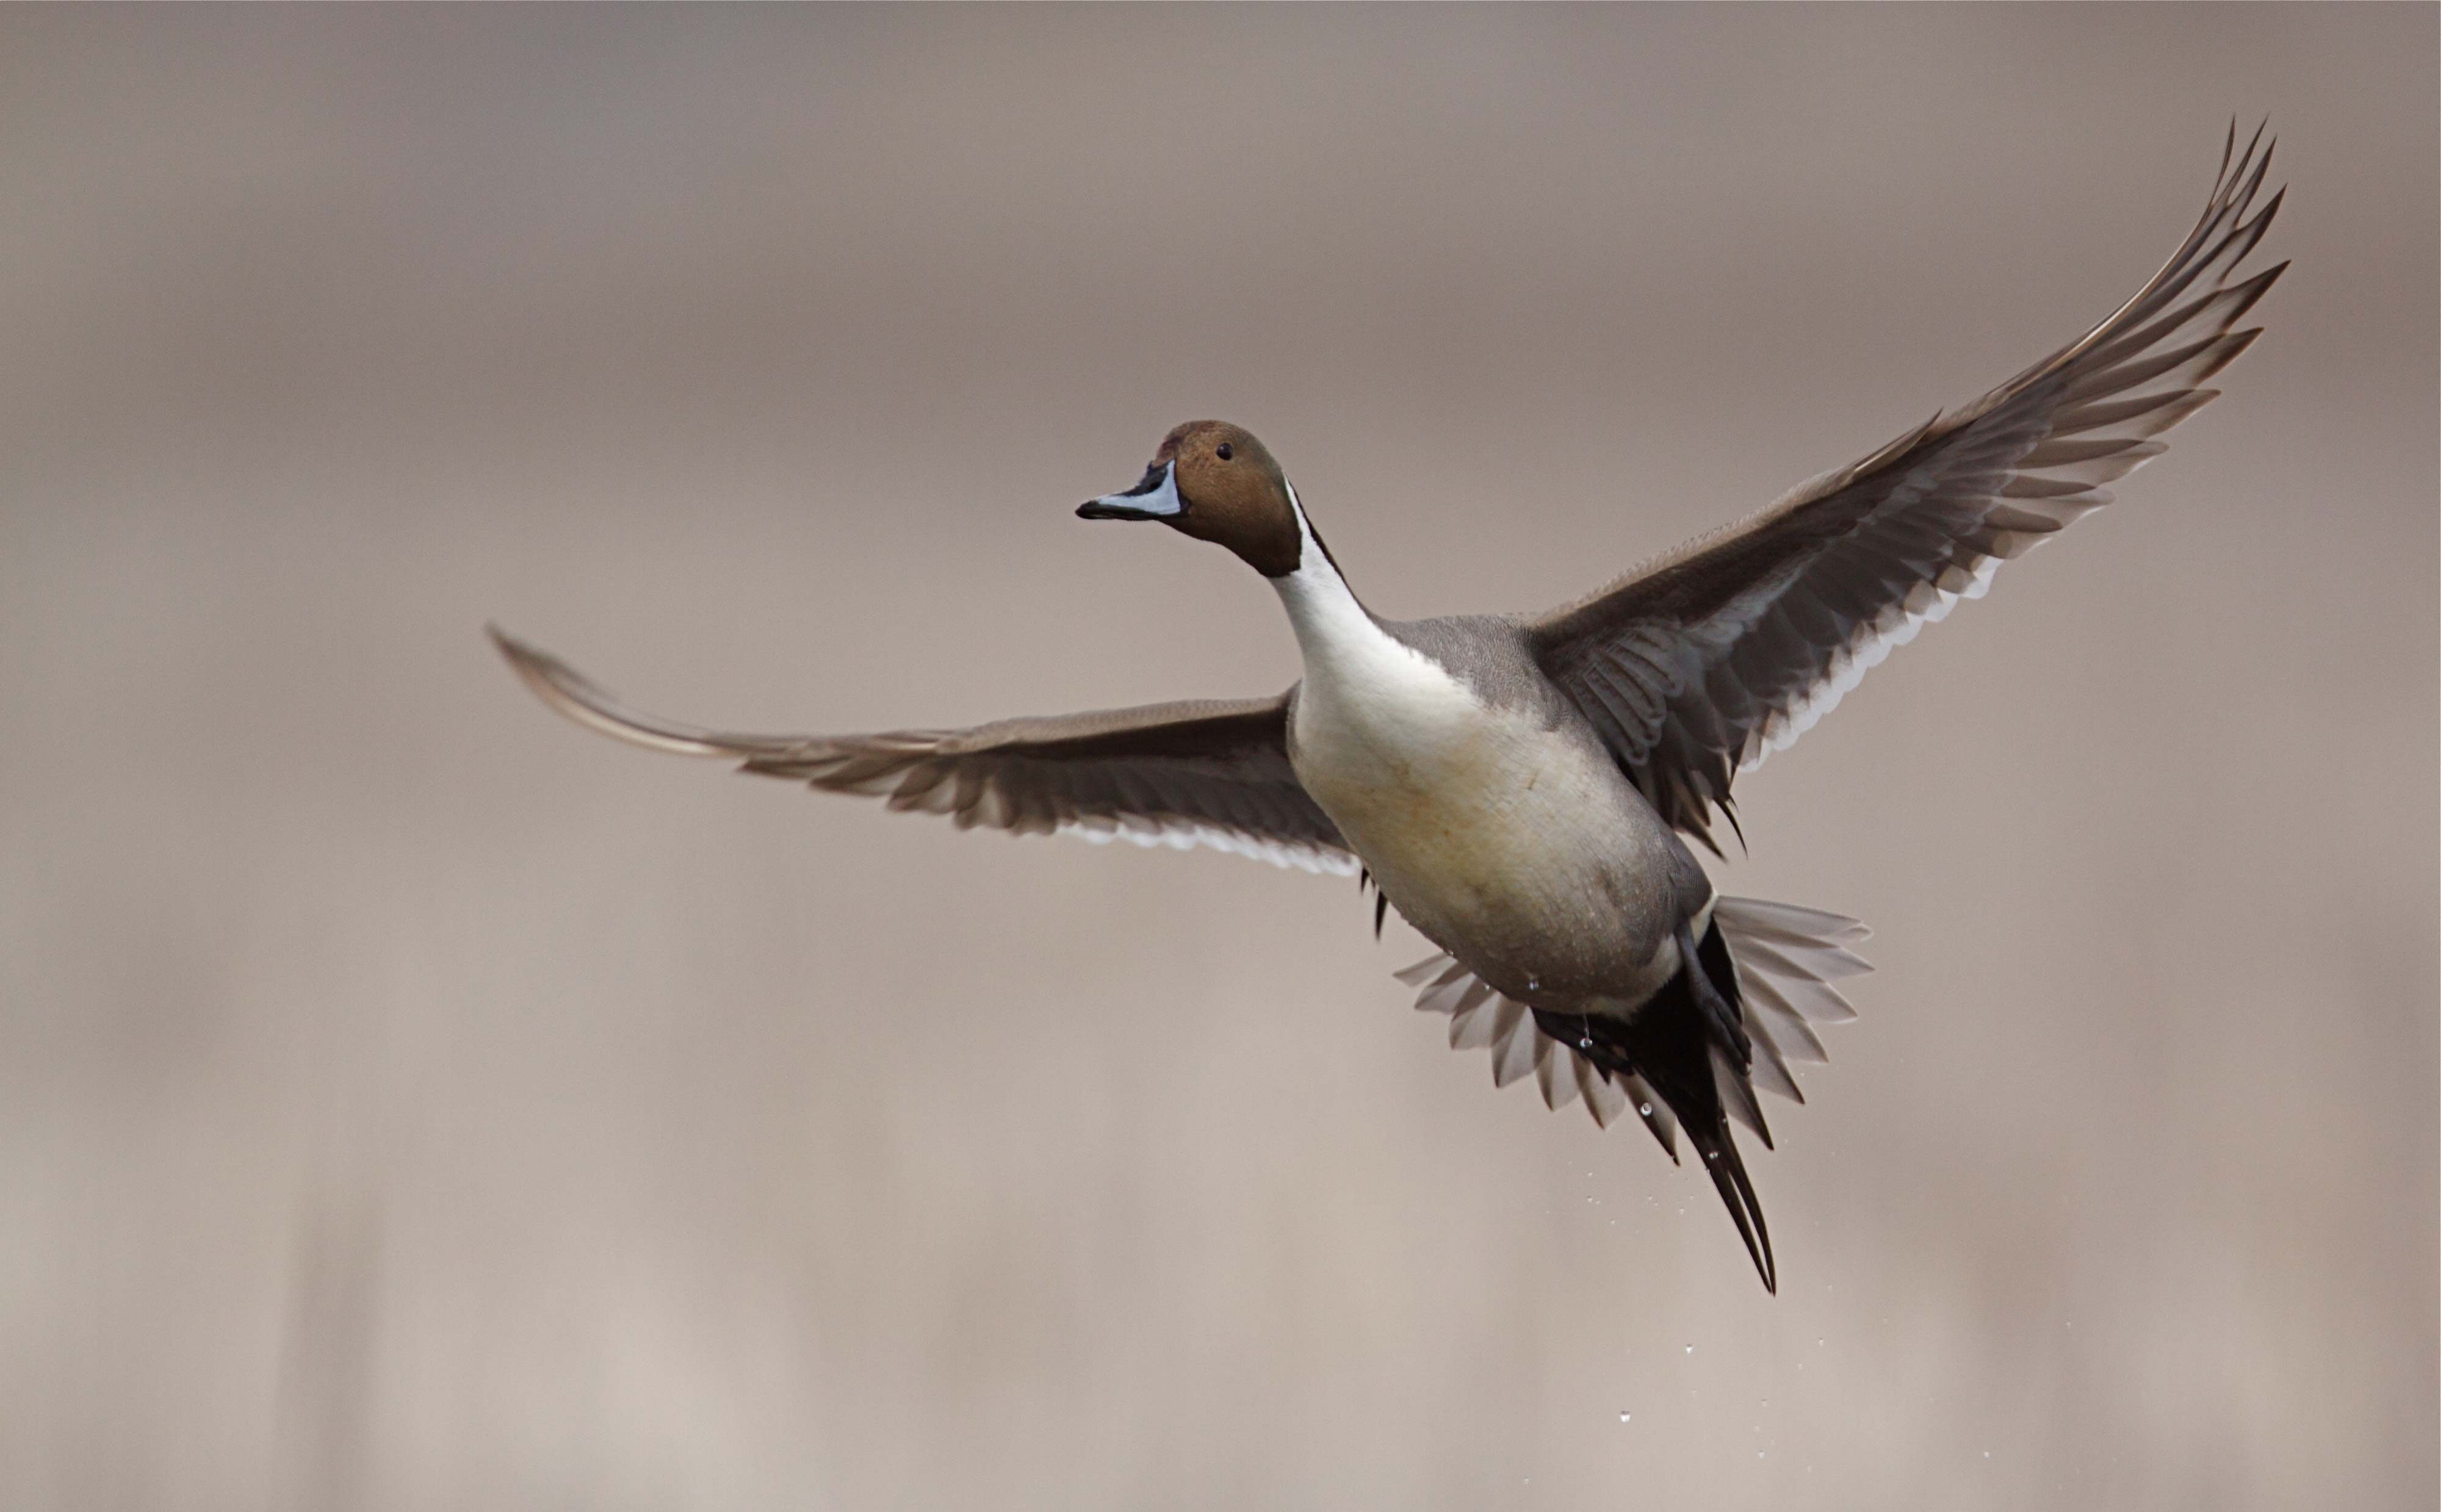 A northern pintail flies with its wings outstretched